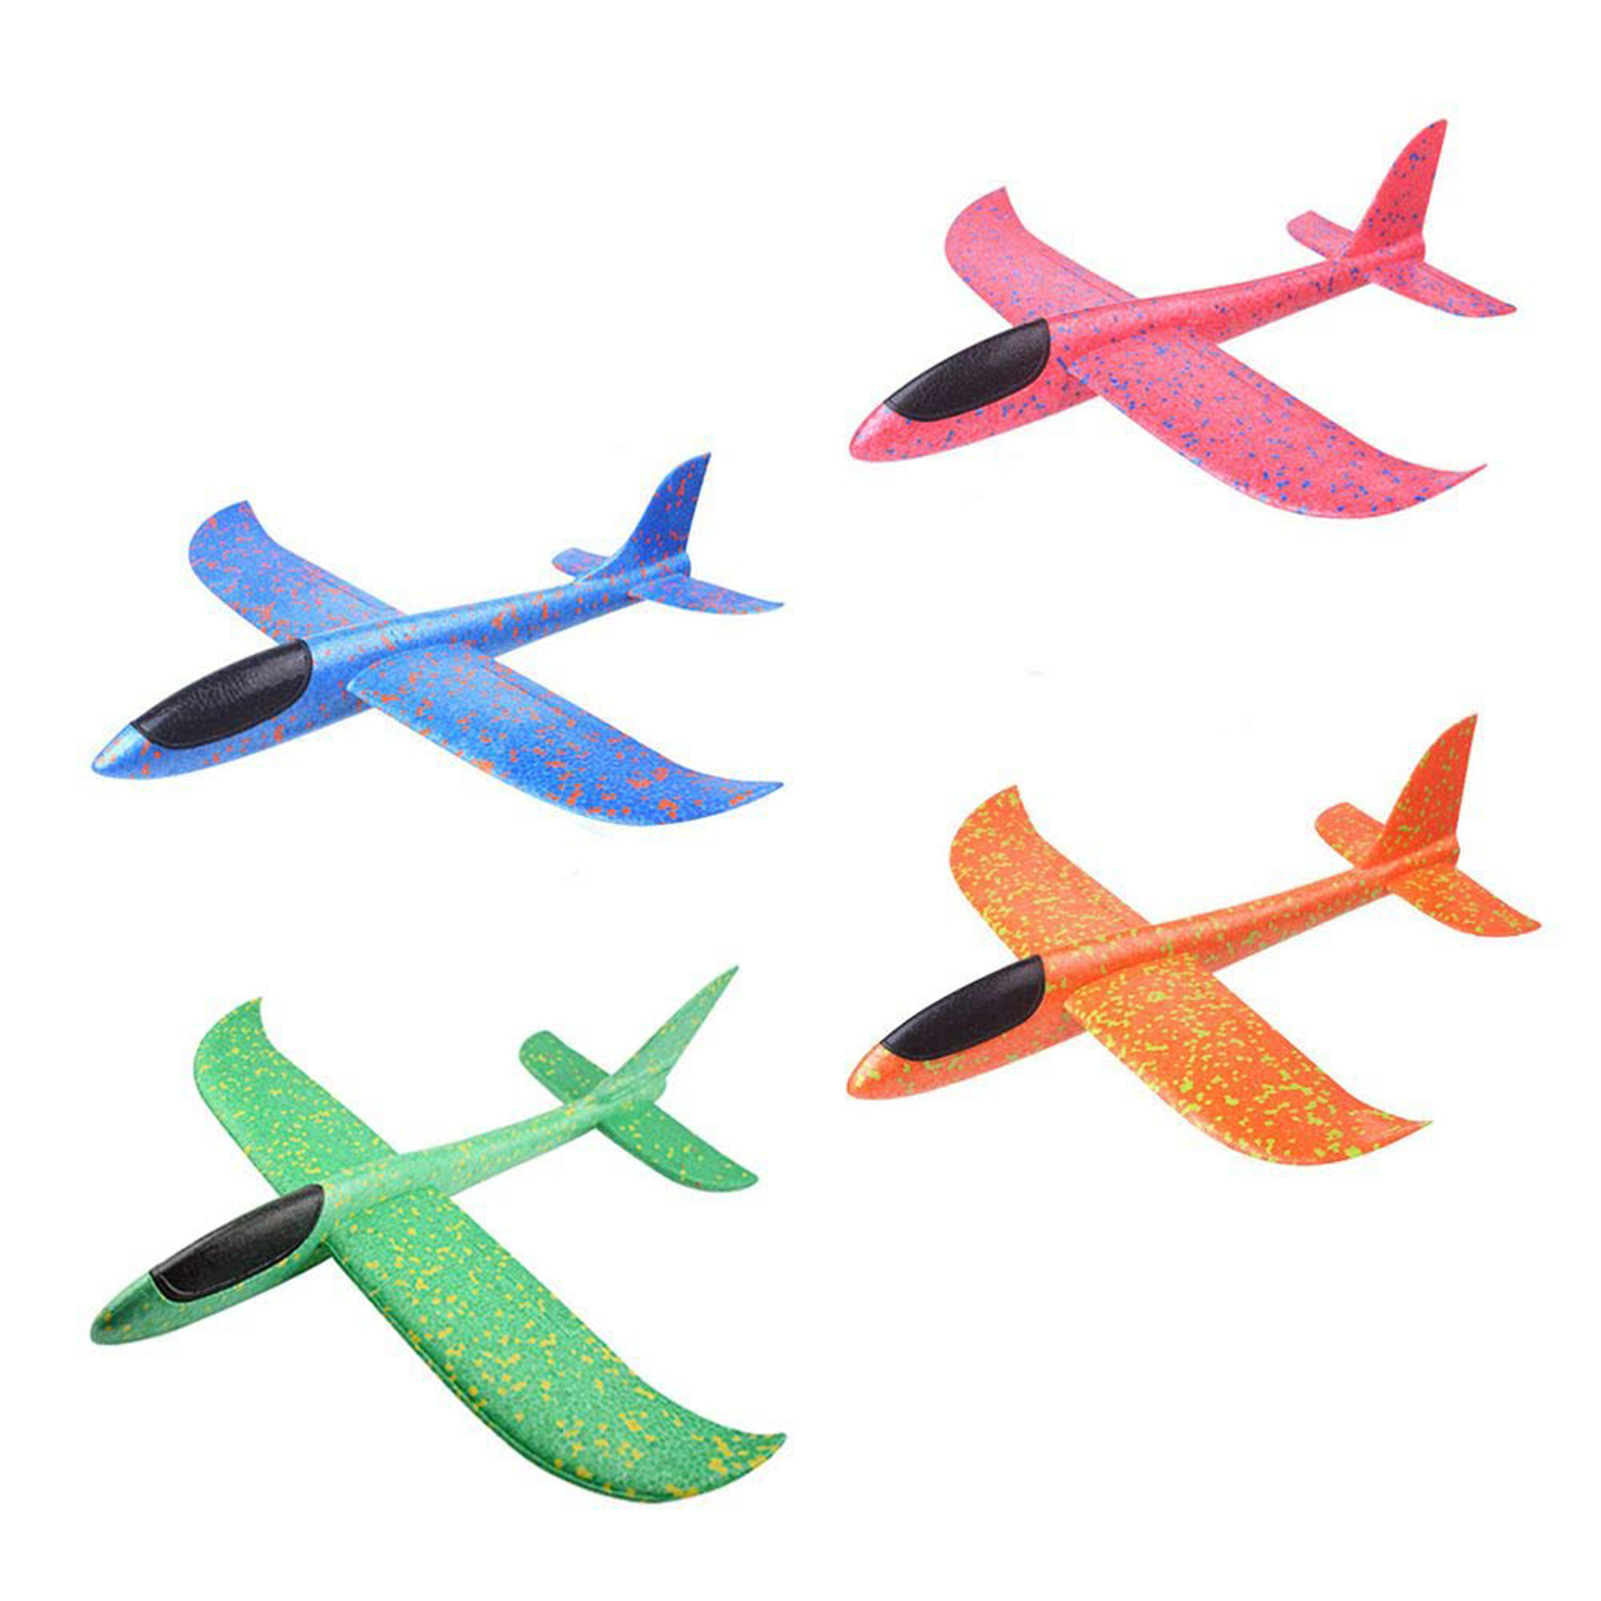 Hand Launch Throwing Glider Aircraft Foam Airplane Plane Model Outdoor Ped Toy 